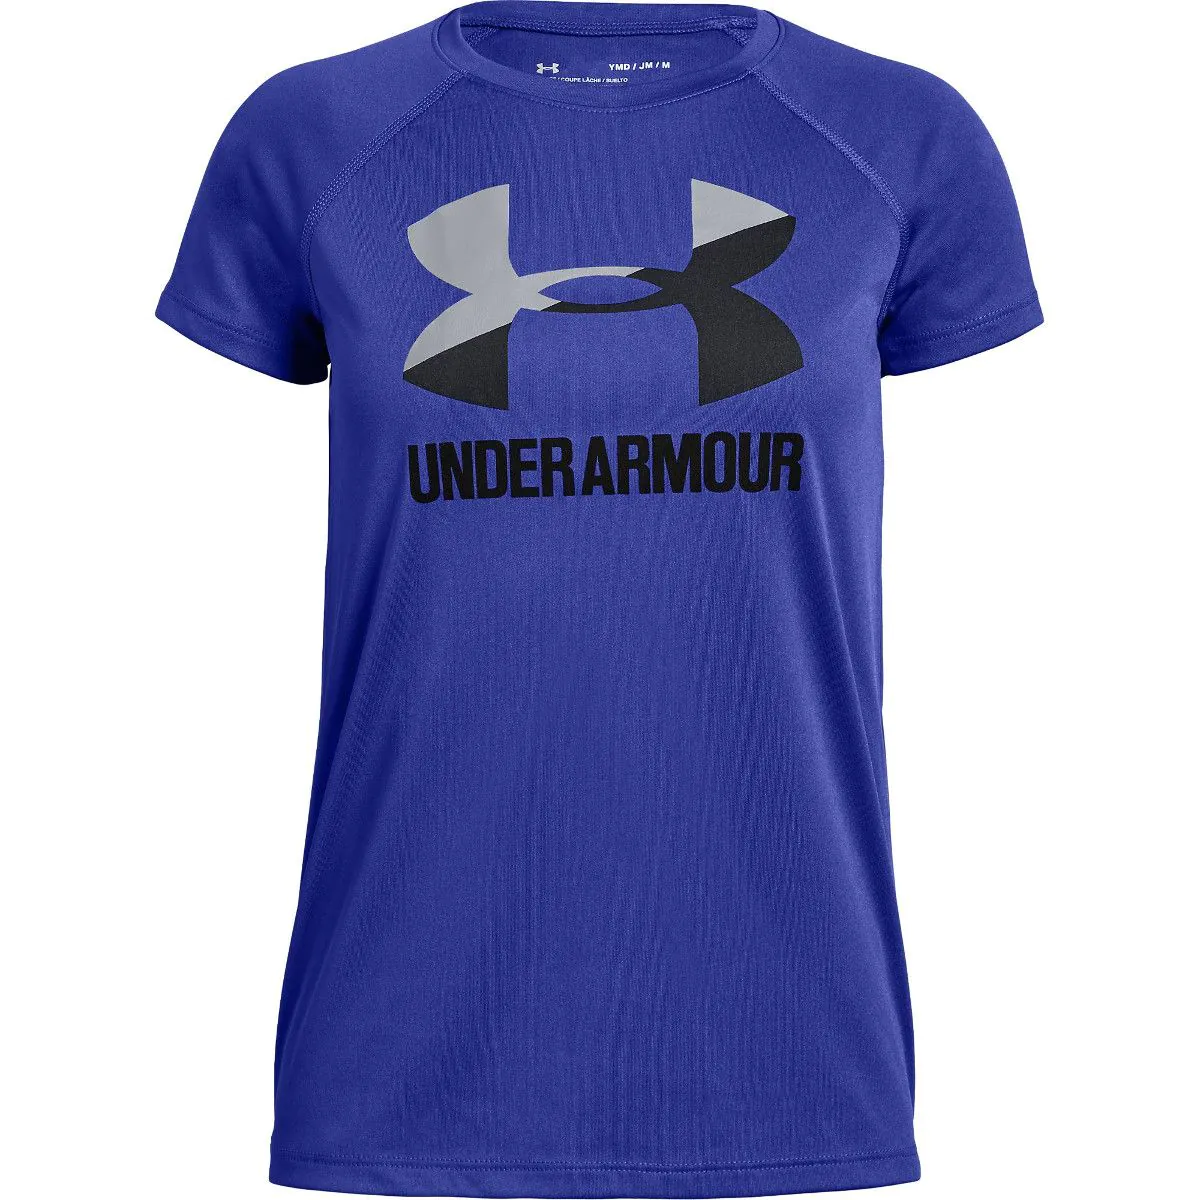 big e under armour, amazing deal 65% off - www.ct-trp.org